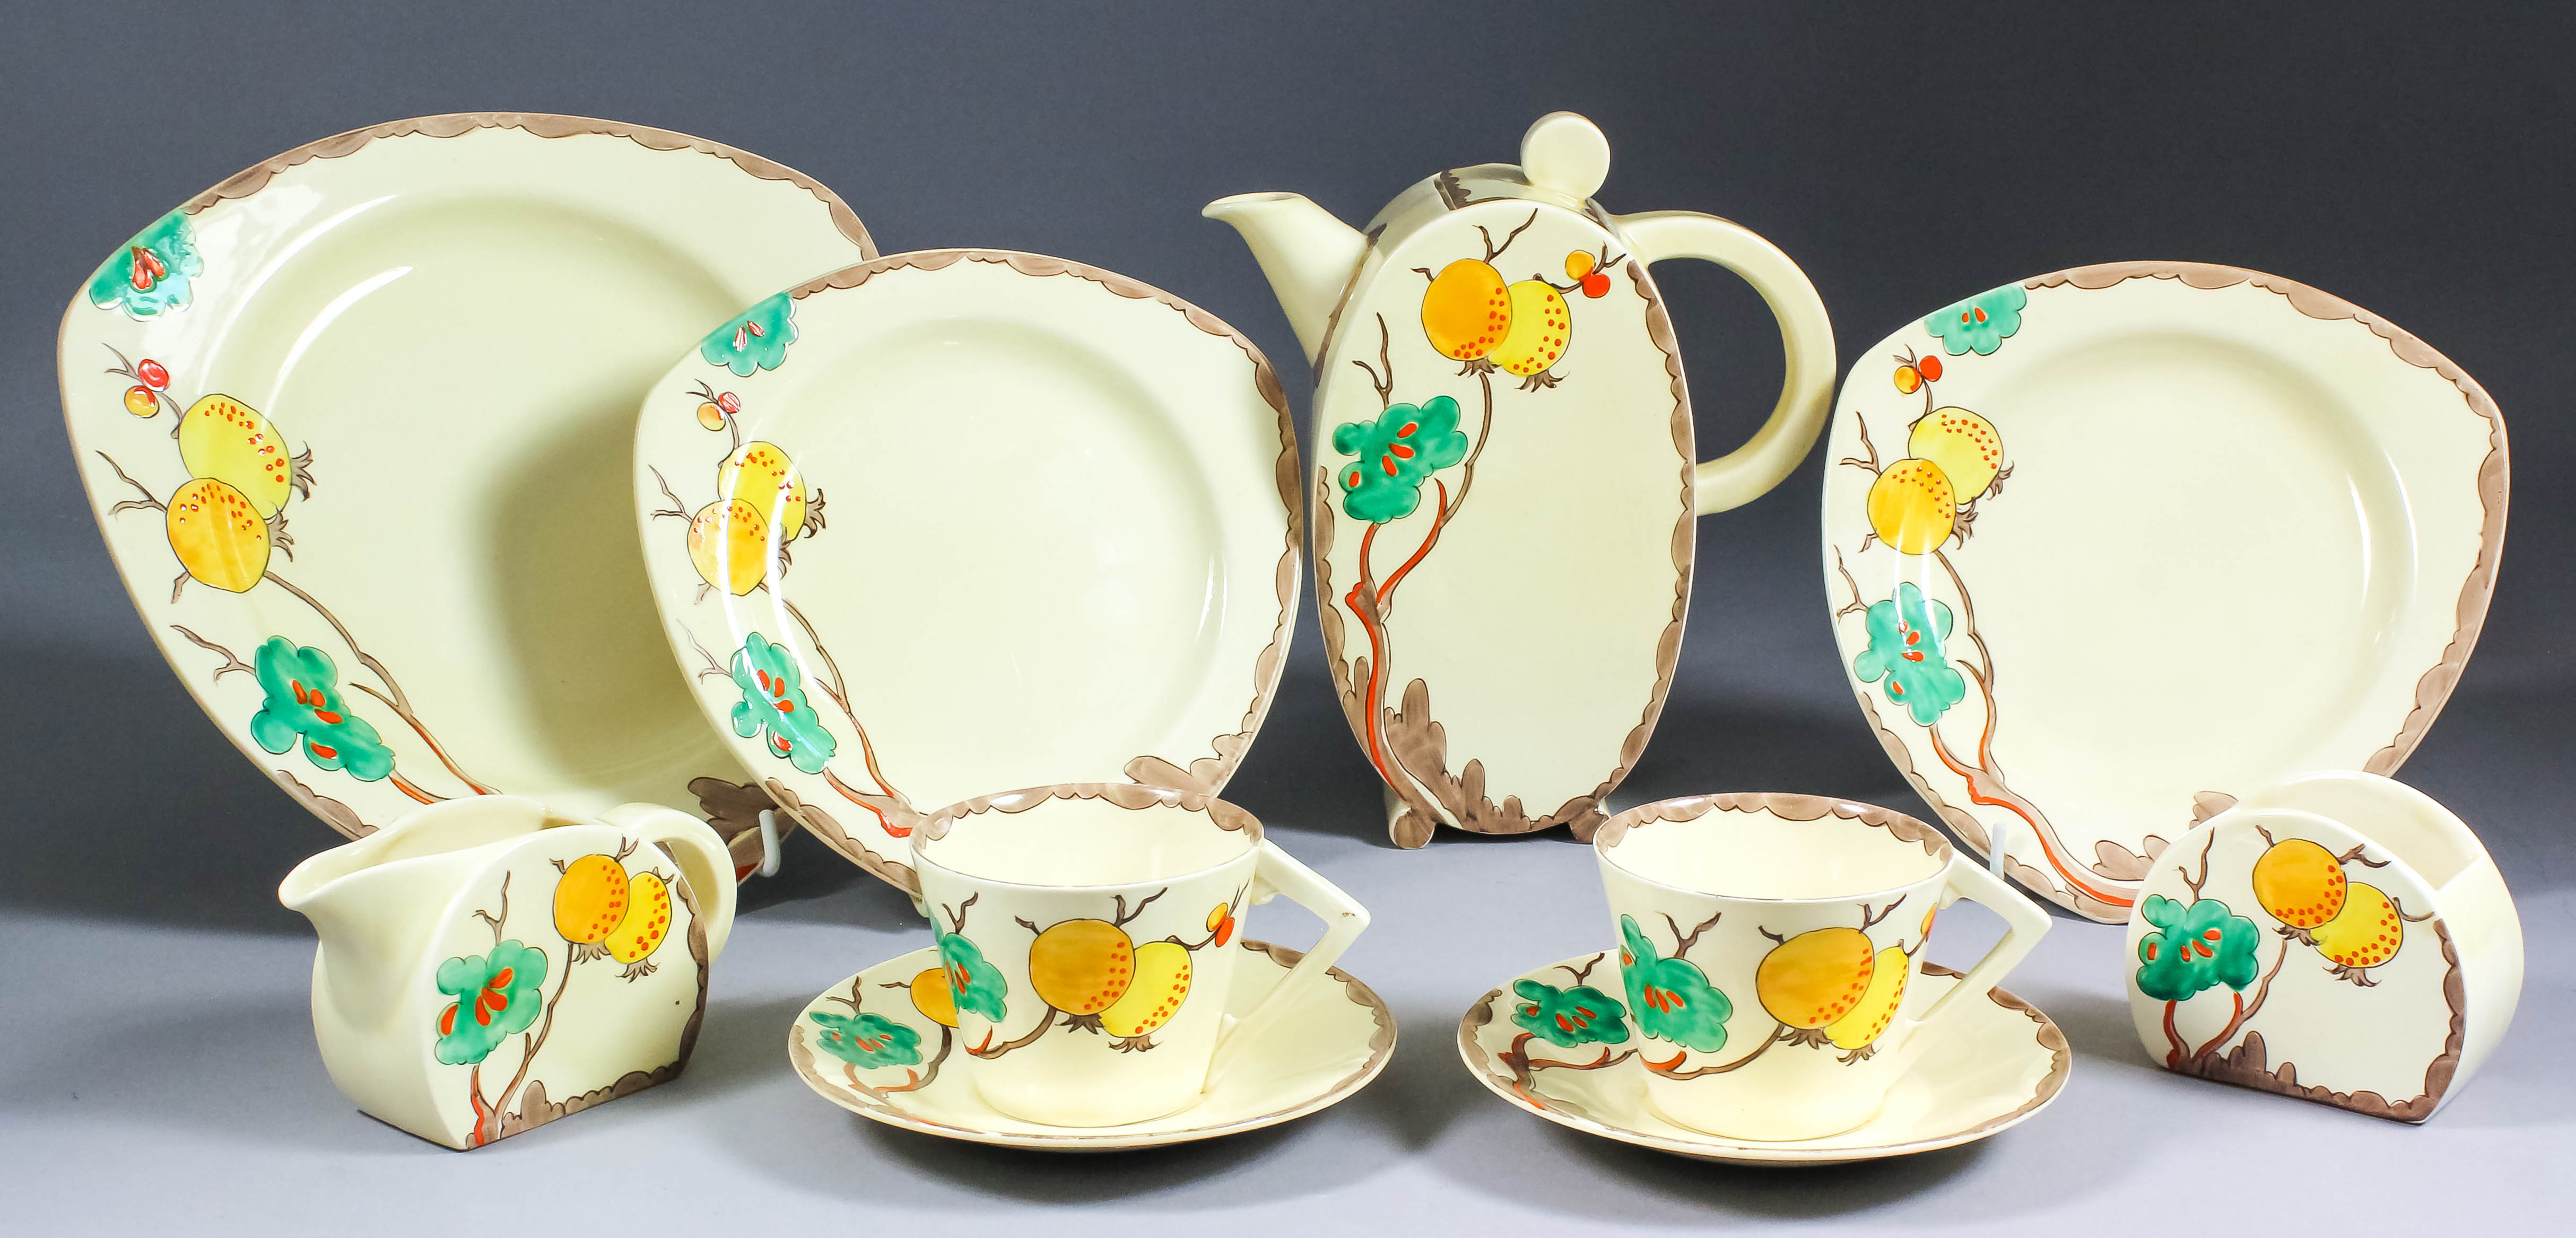 A Clarice Cliff pottery "Bonjour" shape tea for two set, comprising - teapot and lid, sugar bowl,